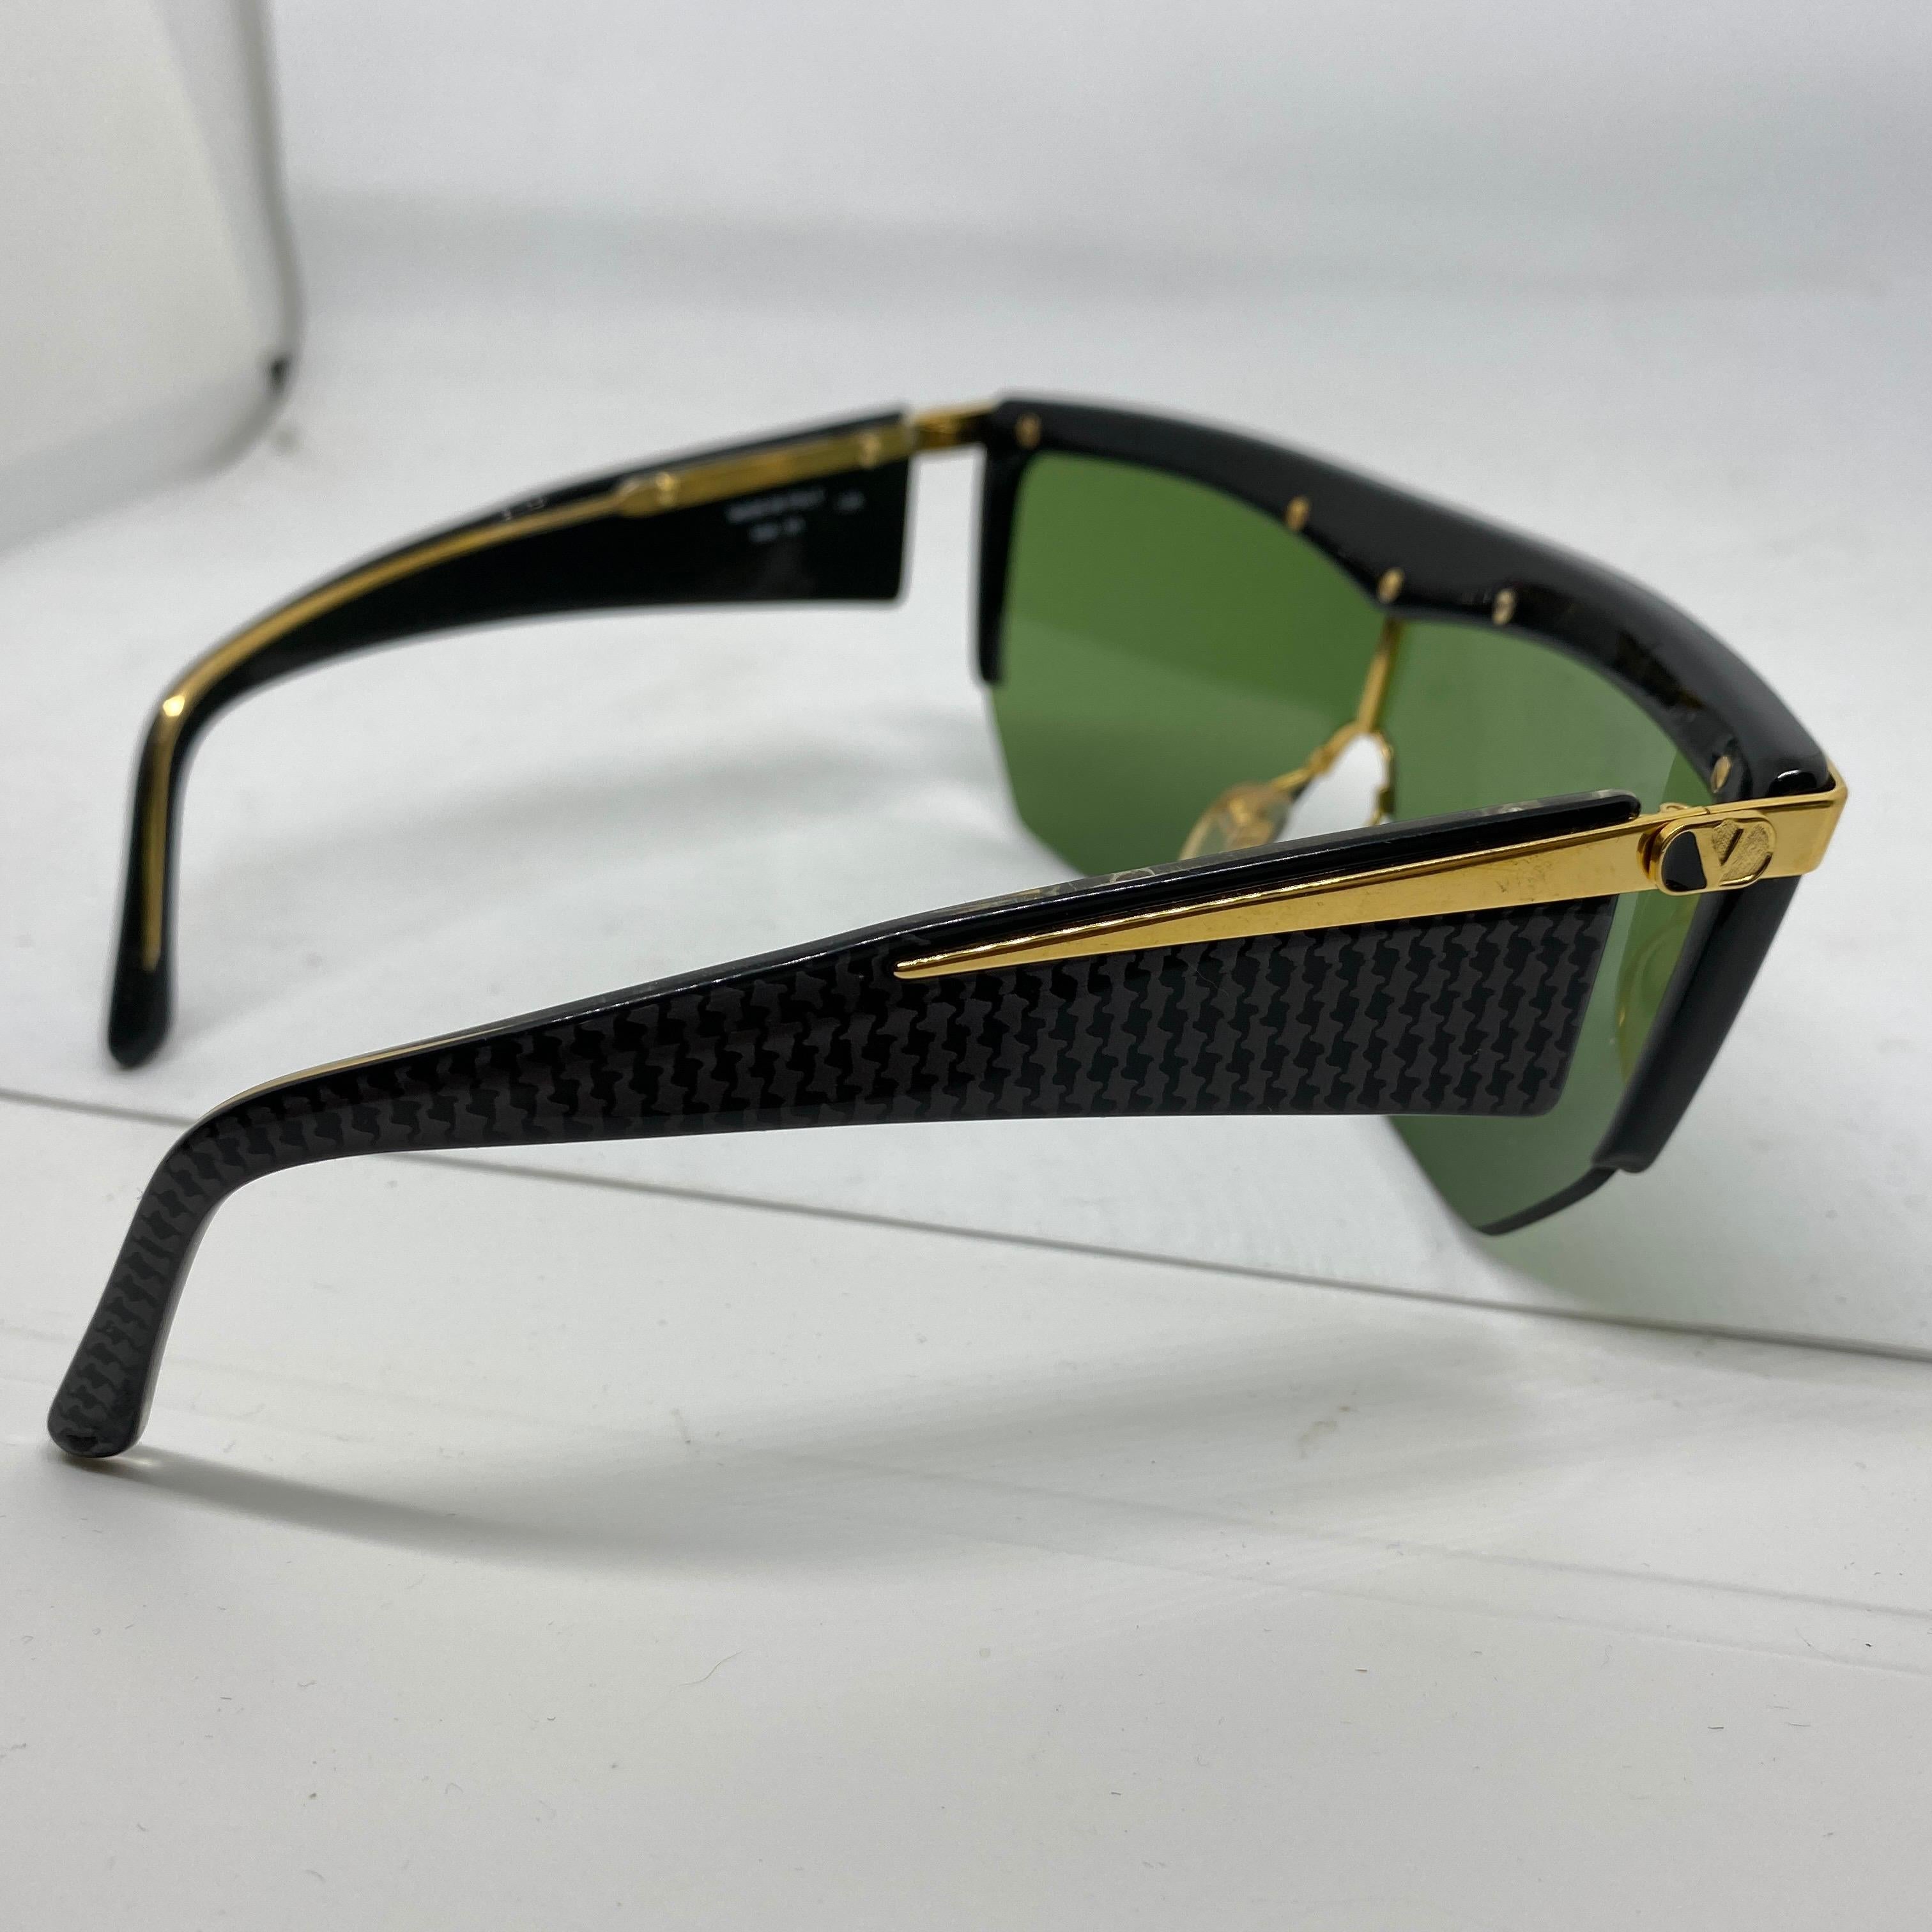 Women's 1990s Vintage Black and Gold Italian Oversized Sunglasses by Valentino 